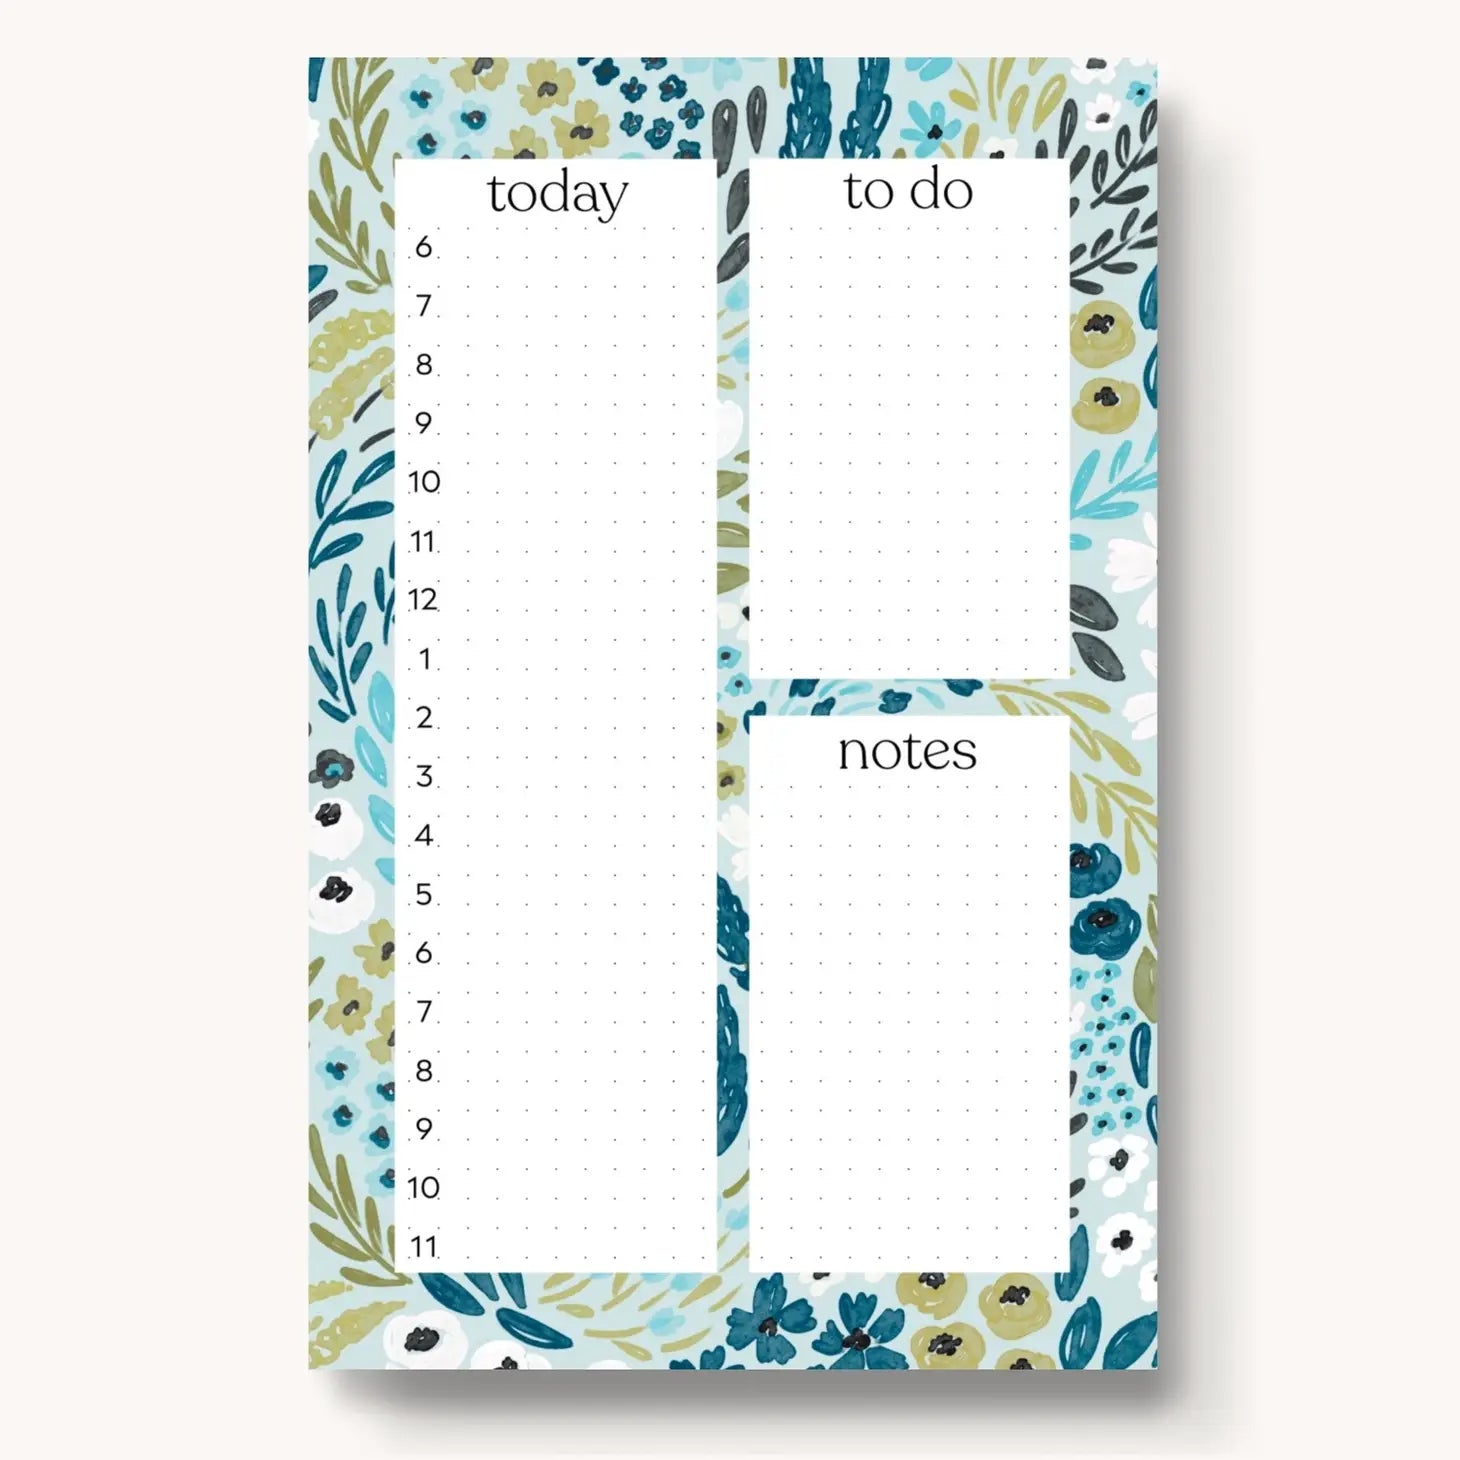 Waterfall Floral Daily Planner Notebook